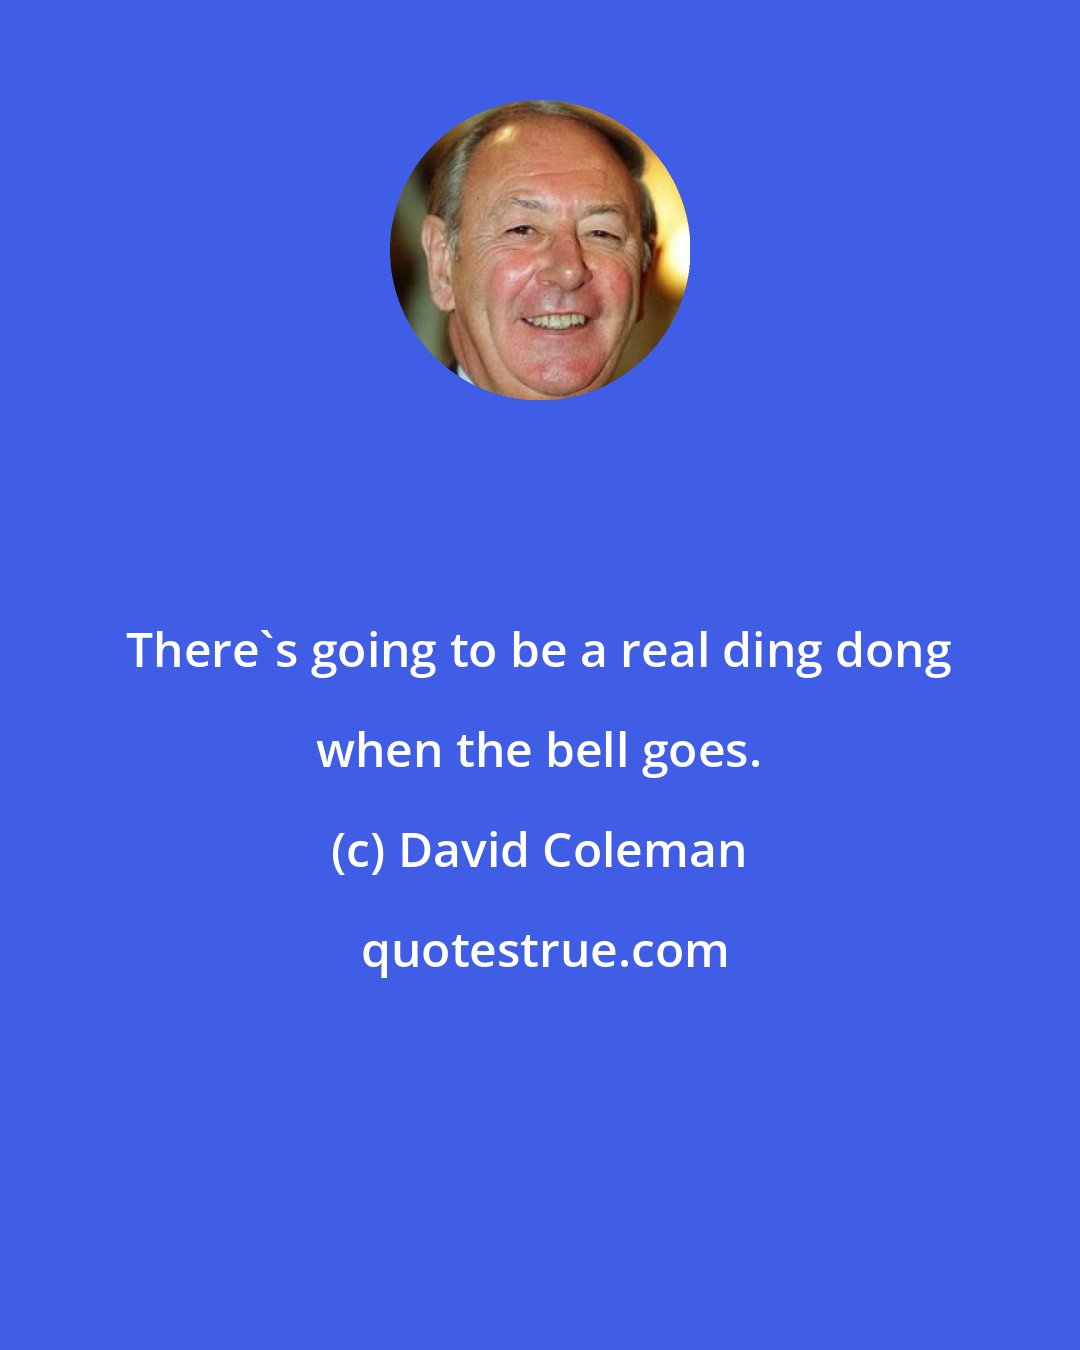 David Coleman: There's going to be a real ding dong when the bell goes.